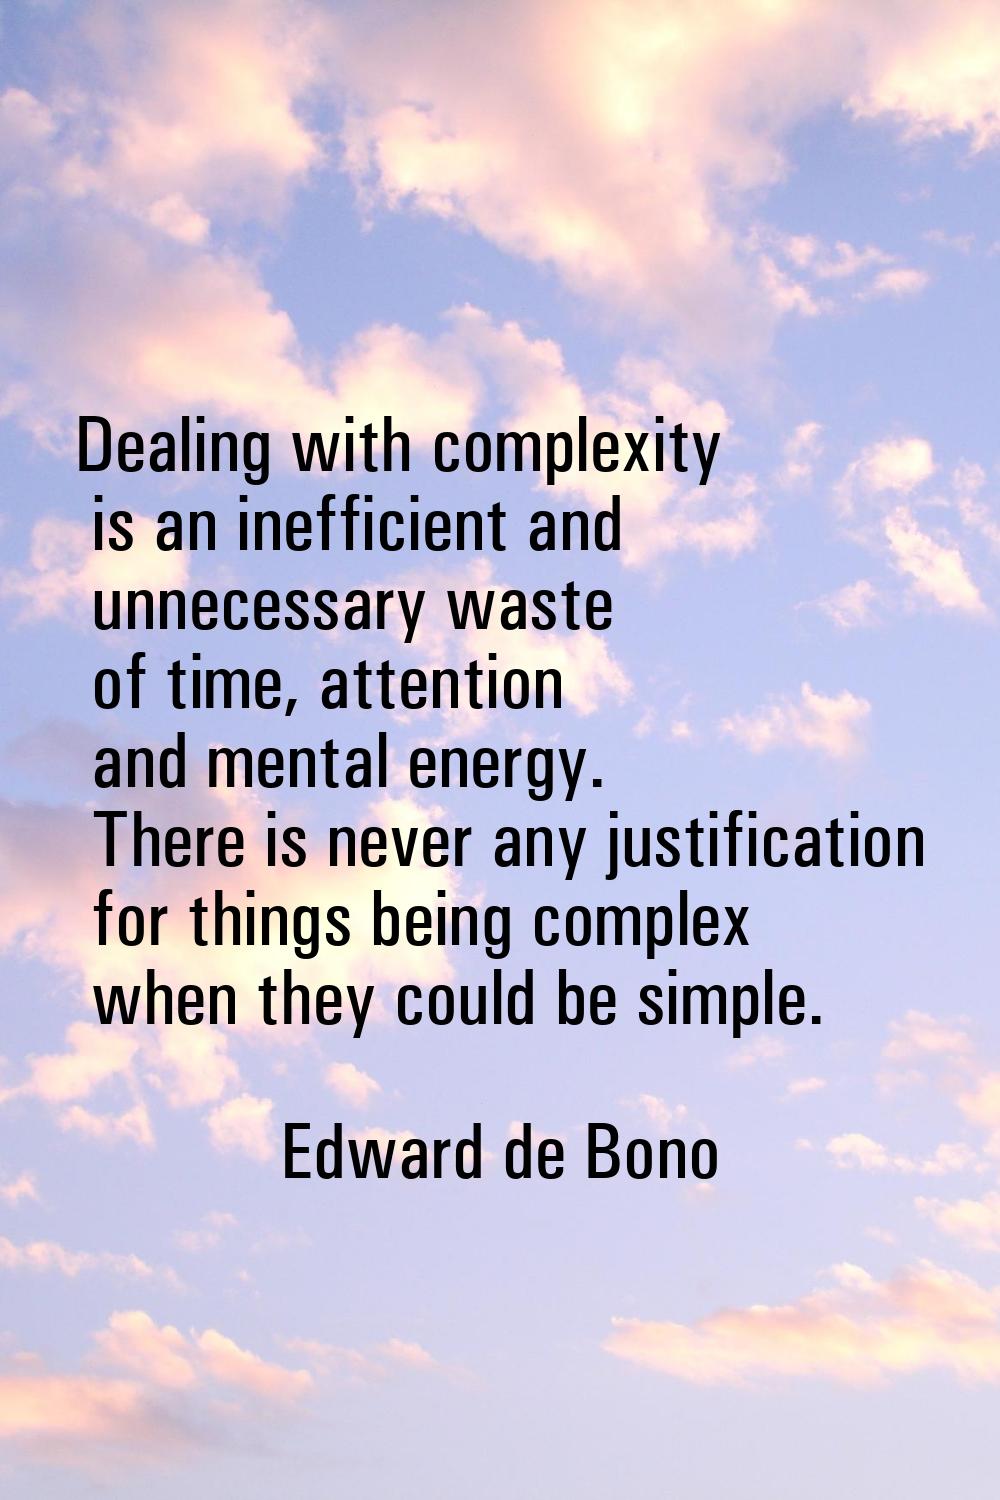 Dealing with complexity is an inefficient and unnecessary waste of time, attention and mental energ